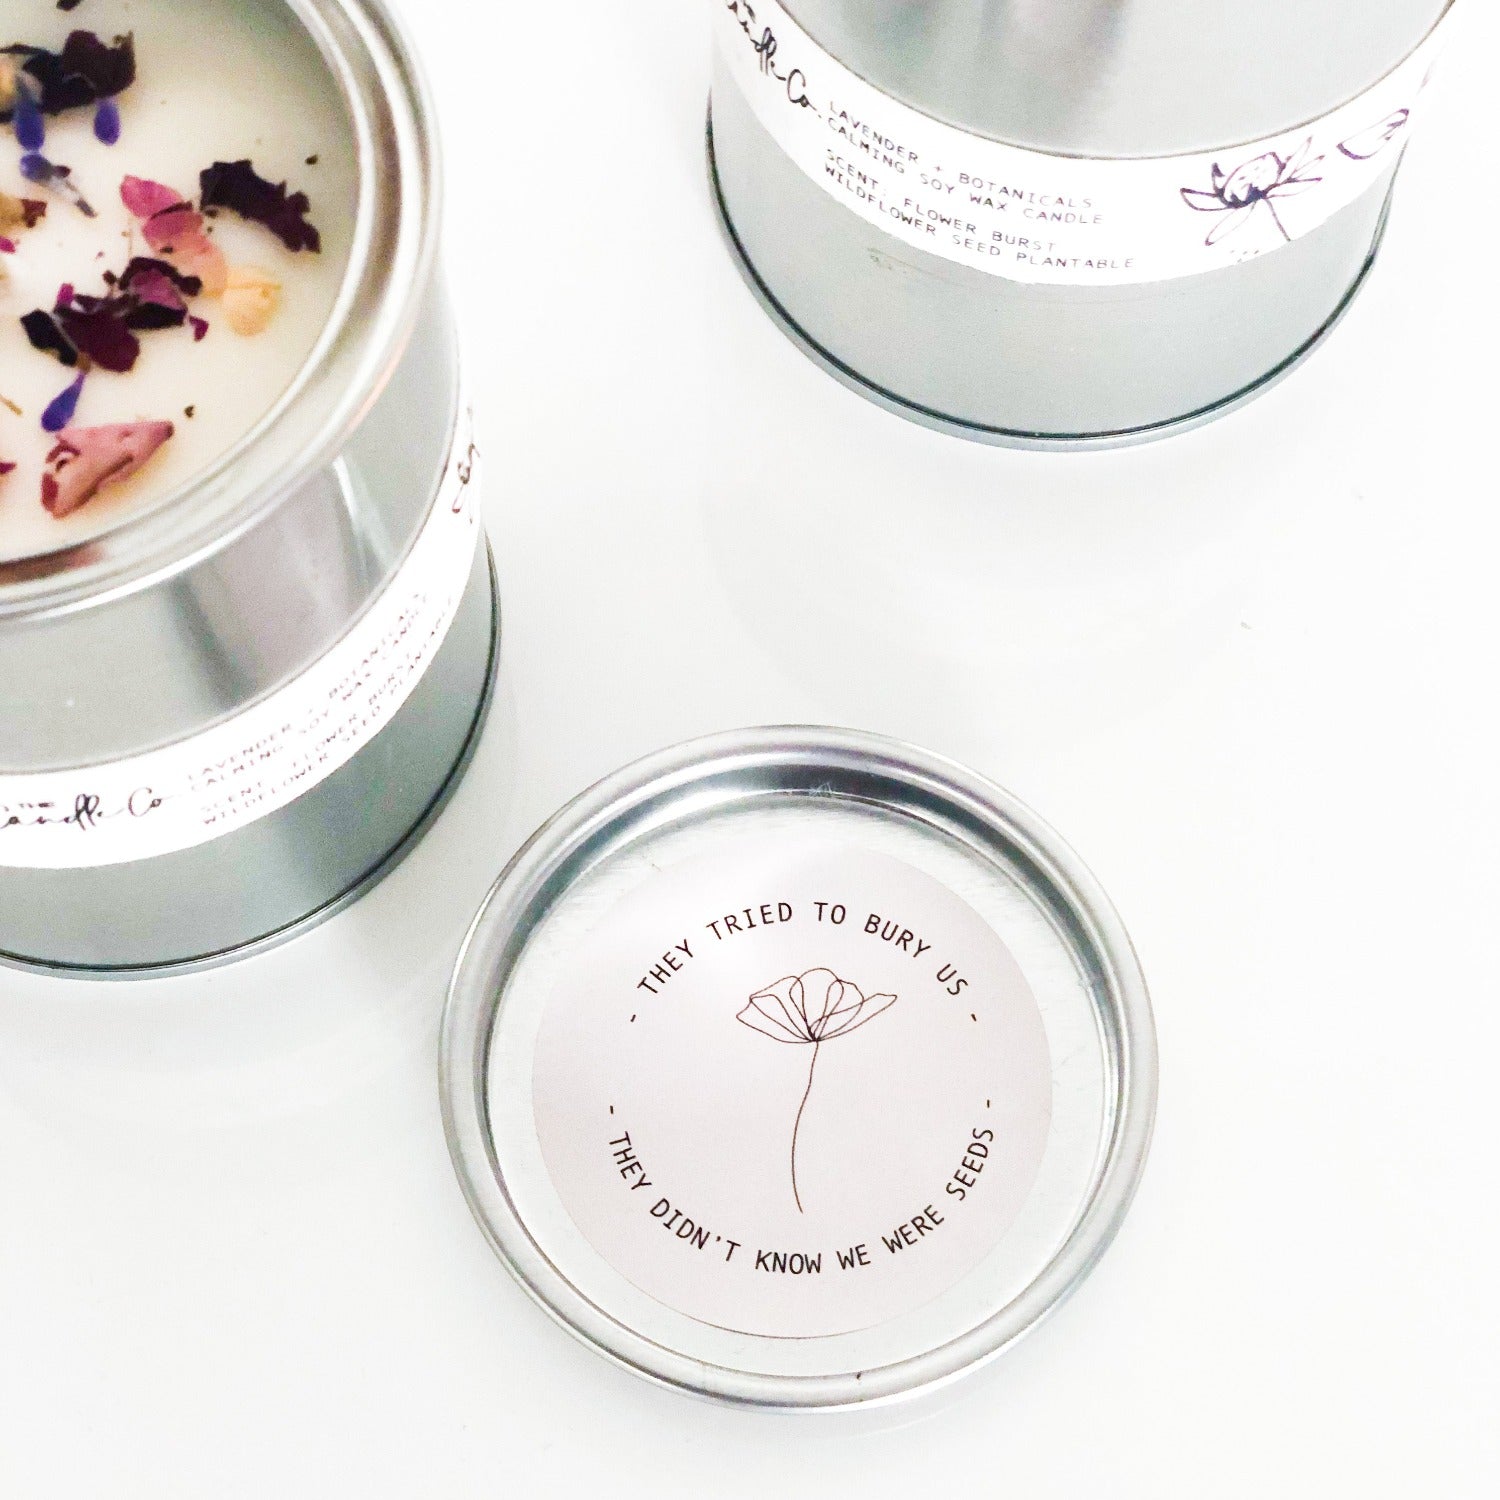 Plantable eco friendly sustainable product - Wildflower seed plantable scented soy wax candle